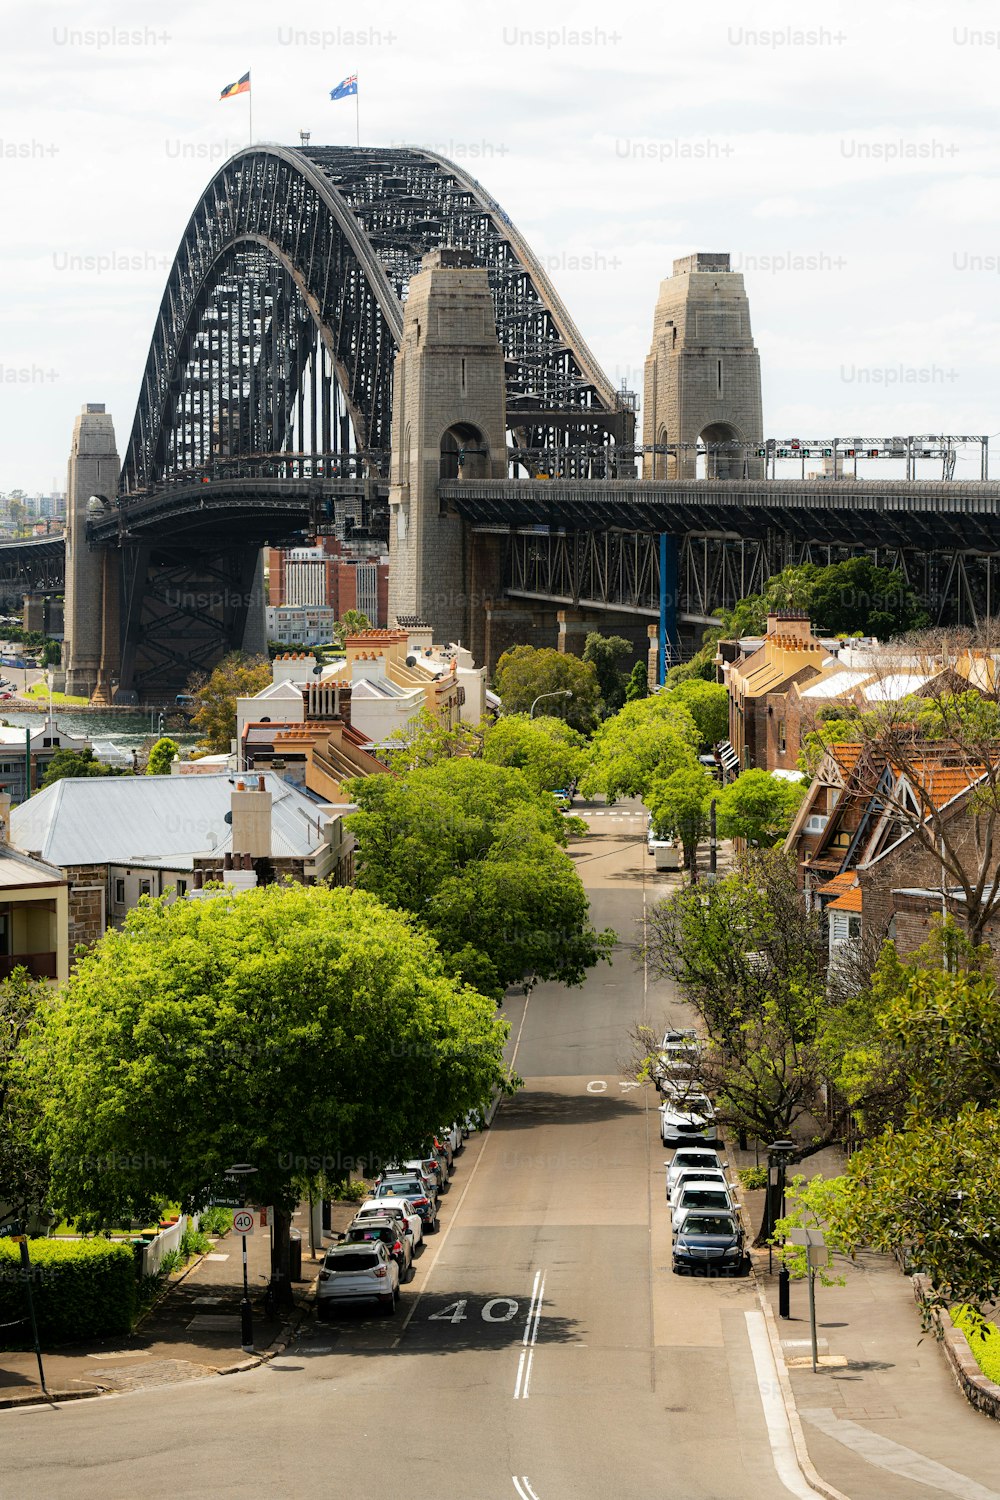 A vertical view of buildings before the Sydney Harbour bridge on a cloudy day